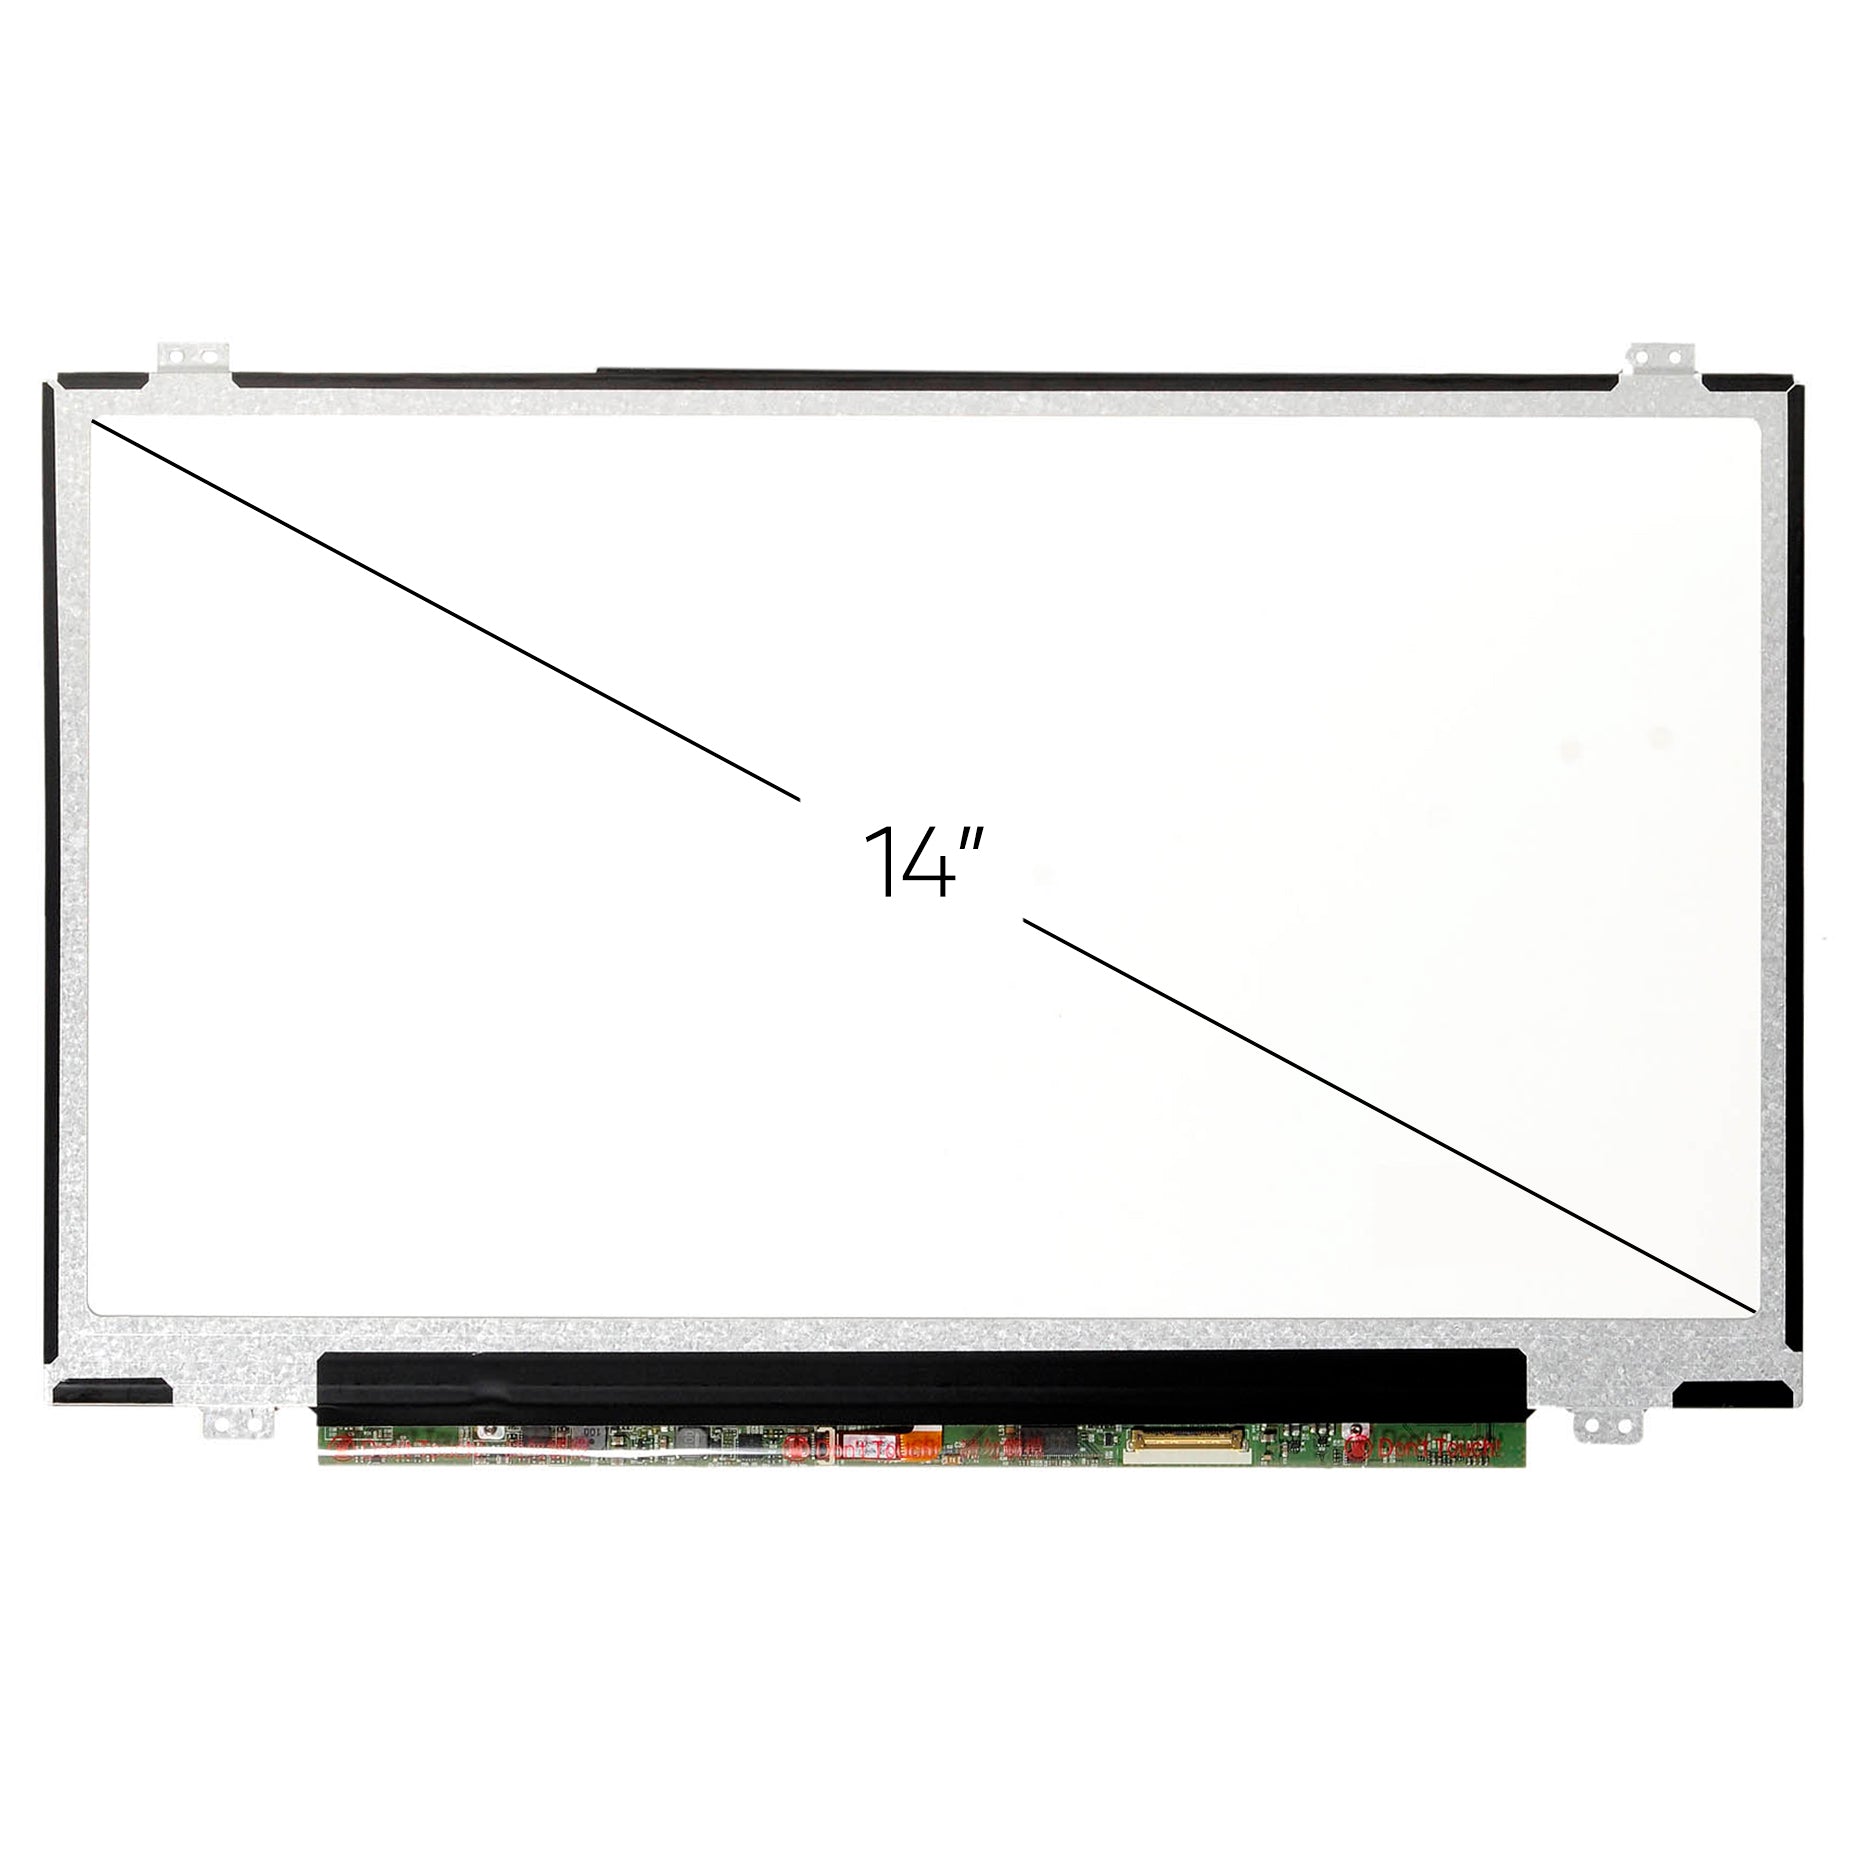 Screen Replacement for Lenovo P/N SD10M83969 FHD 1920x1080 IPS Matte LCD LED Display